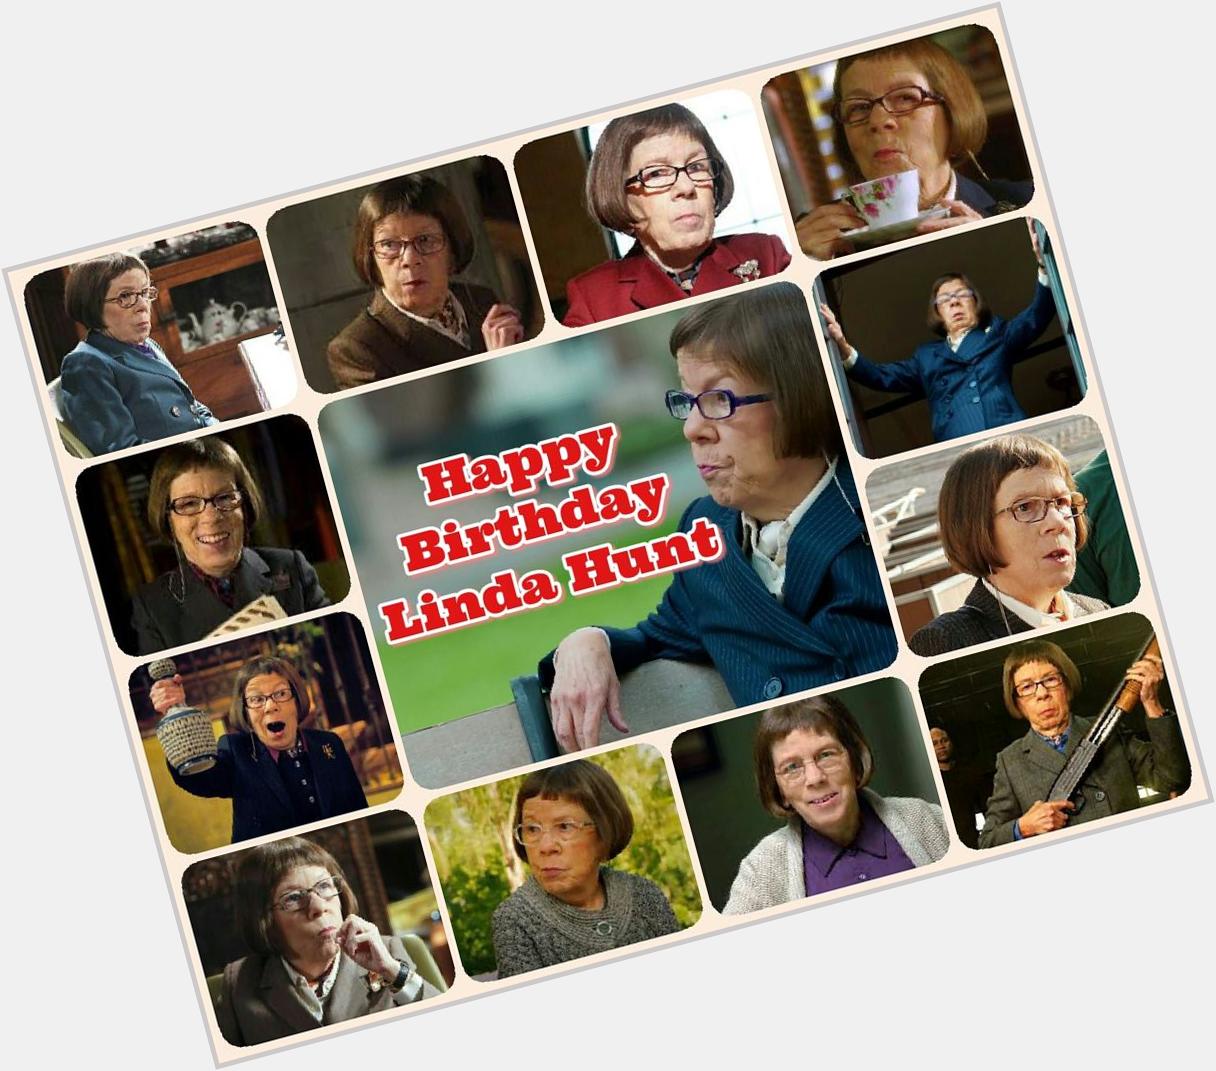 Happy Birthday Linda Hunt!!
Hope you have a great day :)  